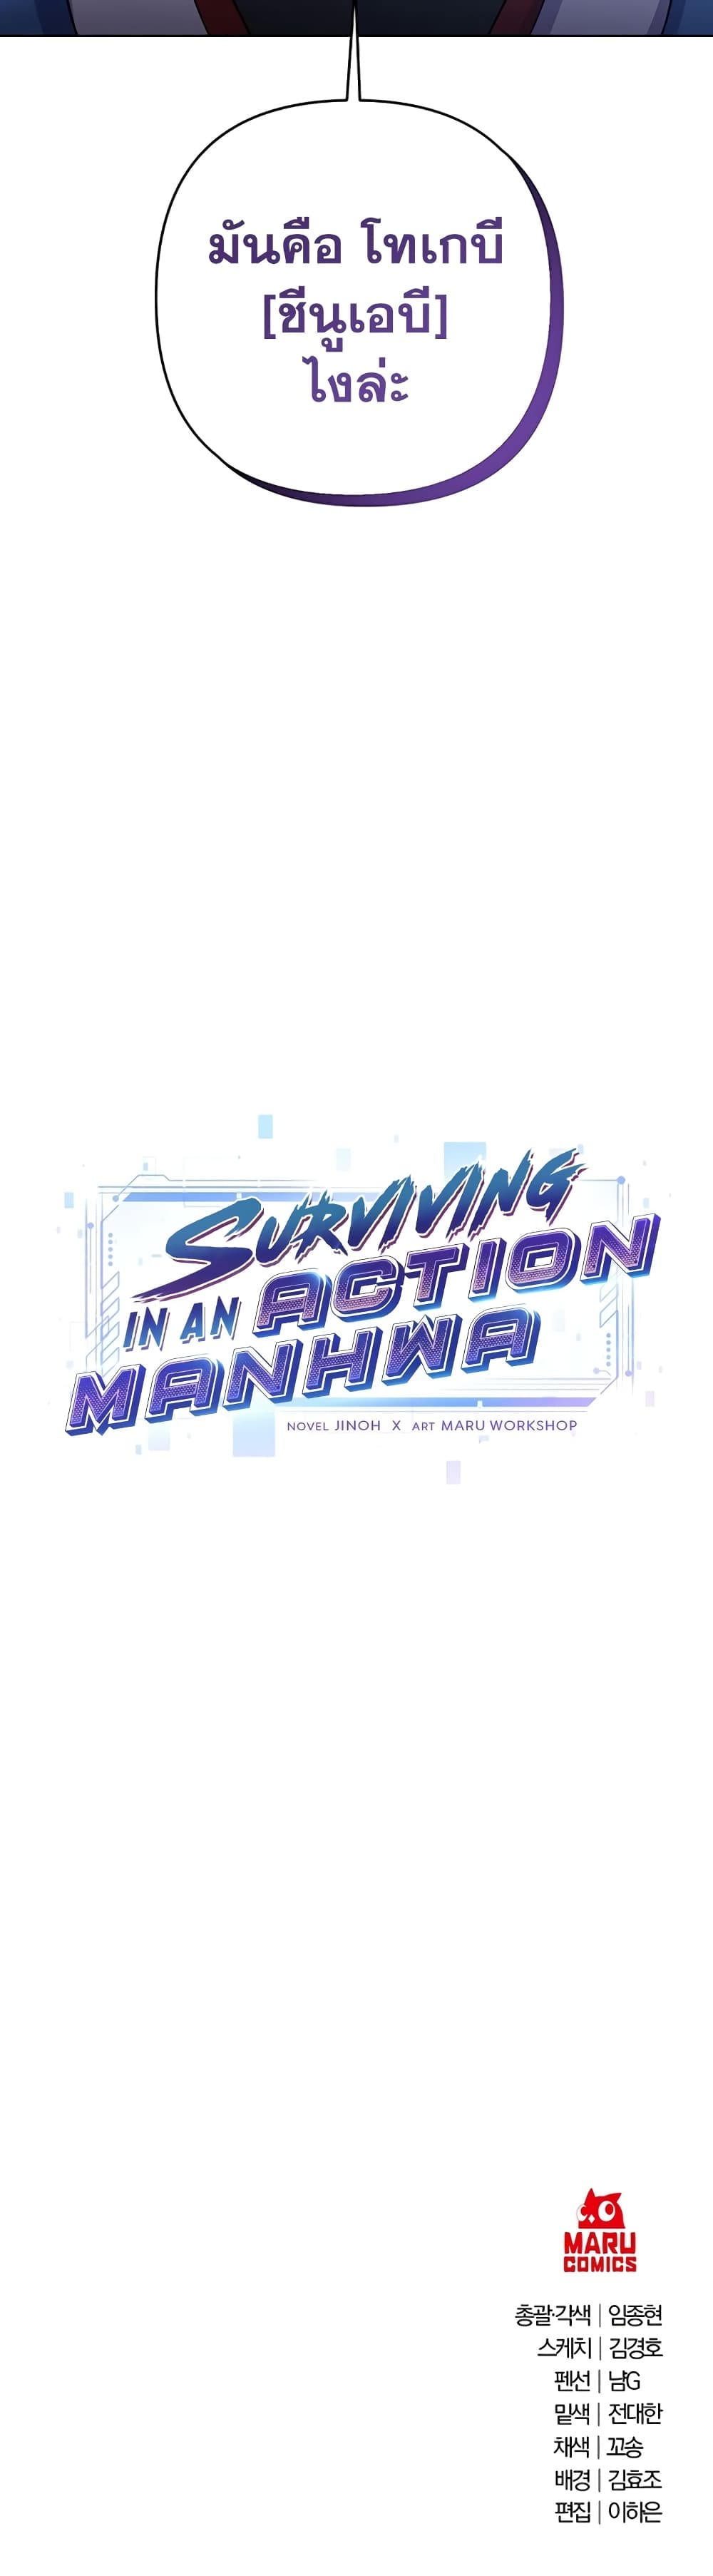 Surviving in an Action Manhwa 18-18